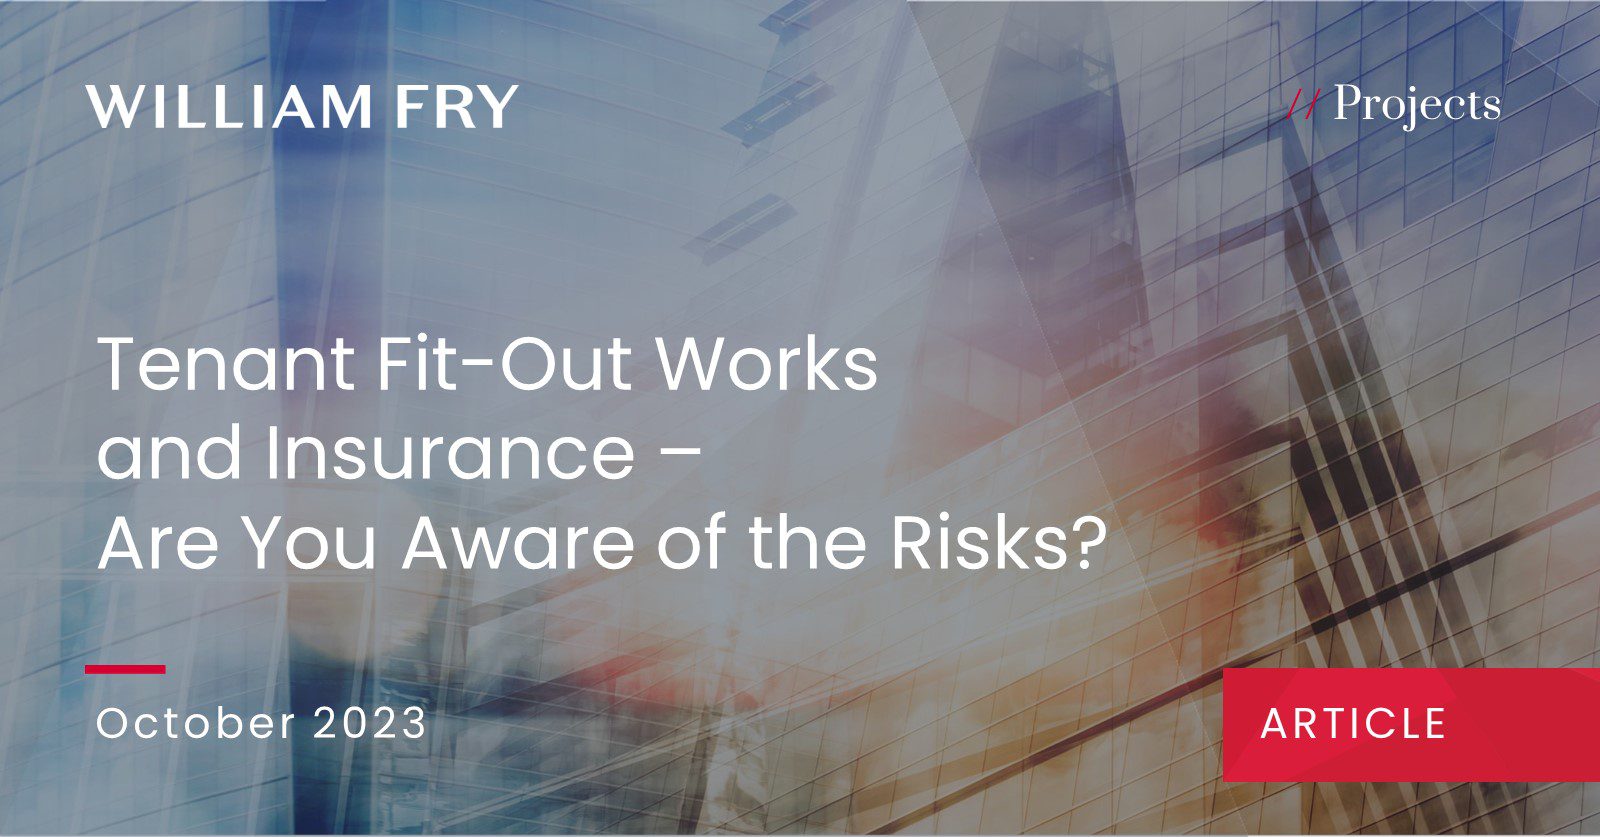 Tenant Fit-Out Works and Insurance – Are You Aware of the Risks?